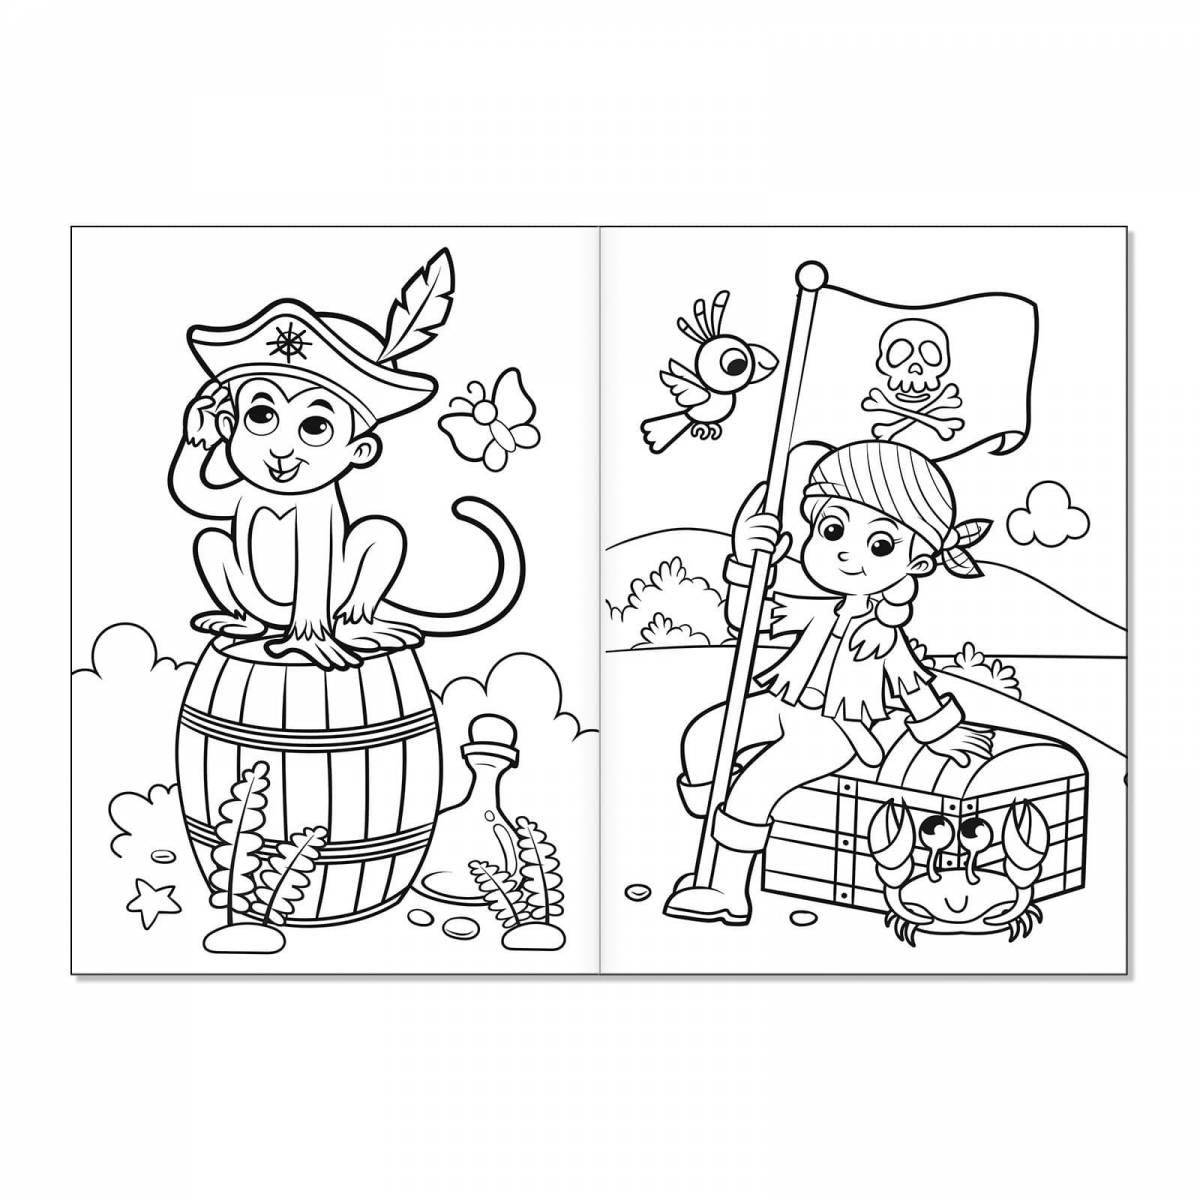 Fairytale coloring book for kids a5 size